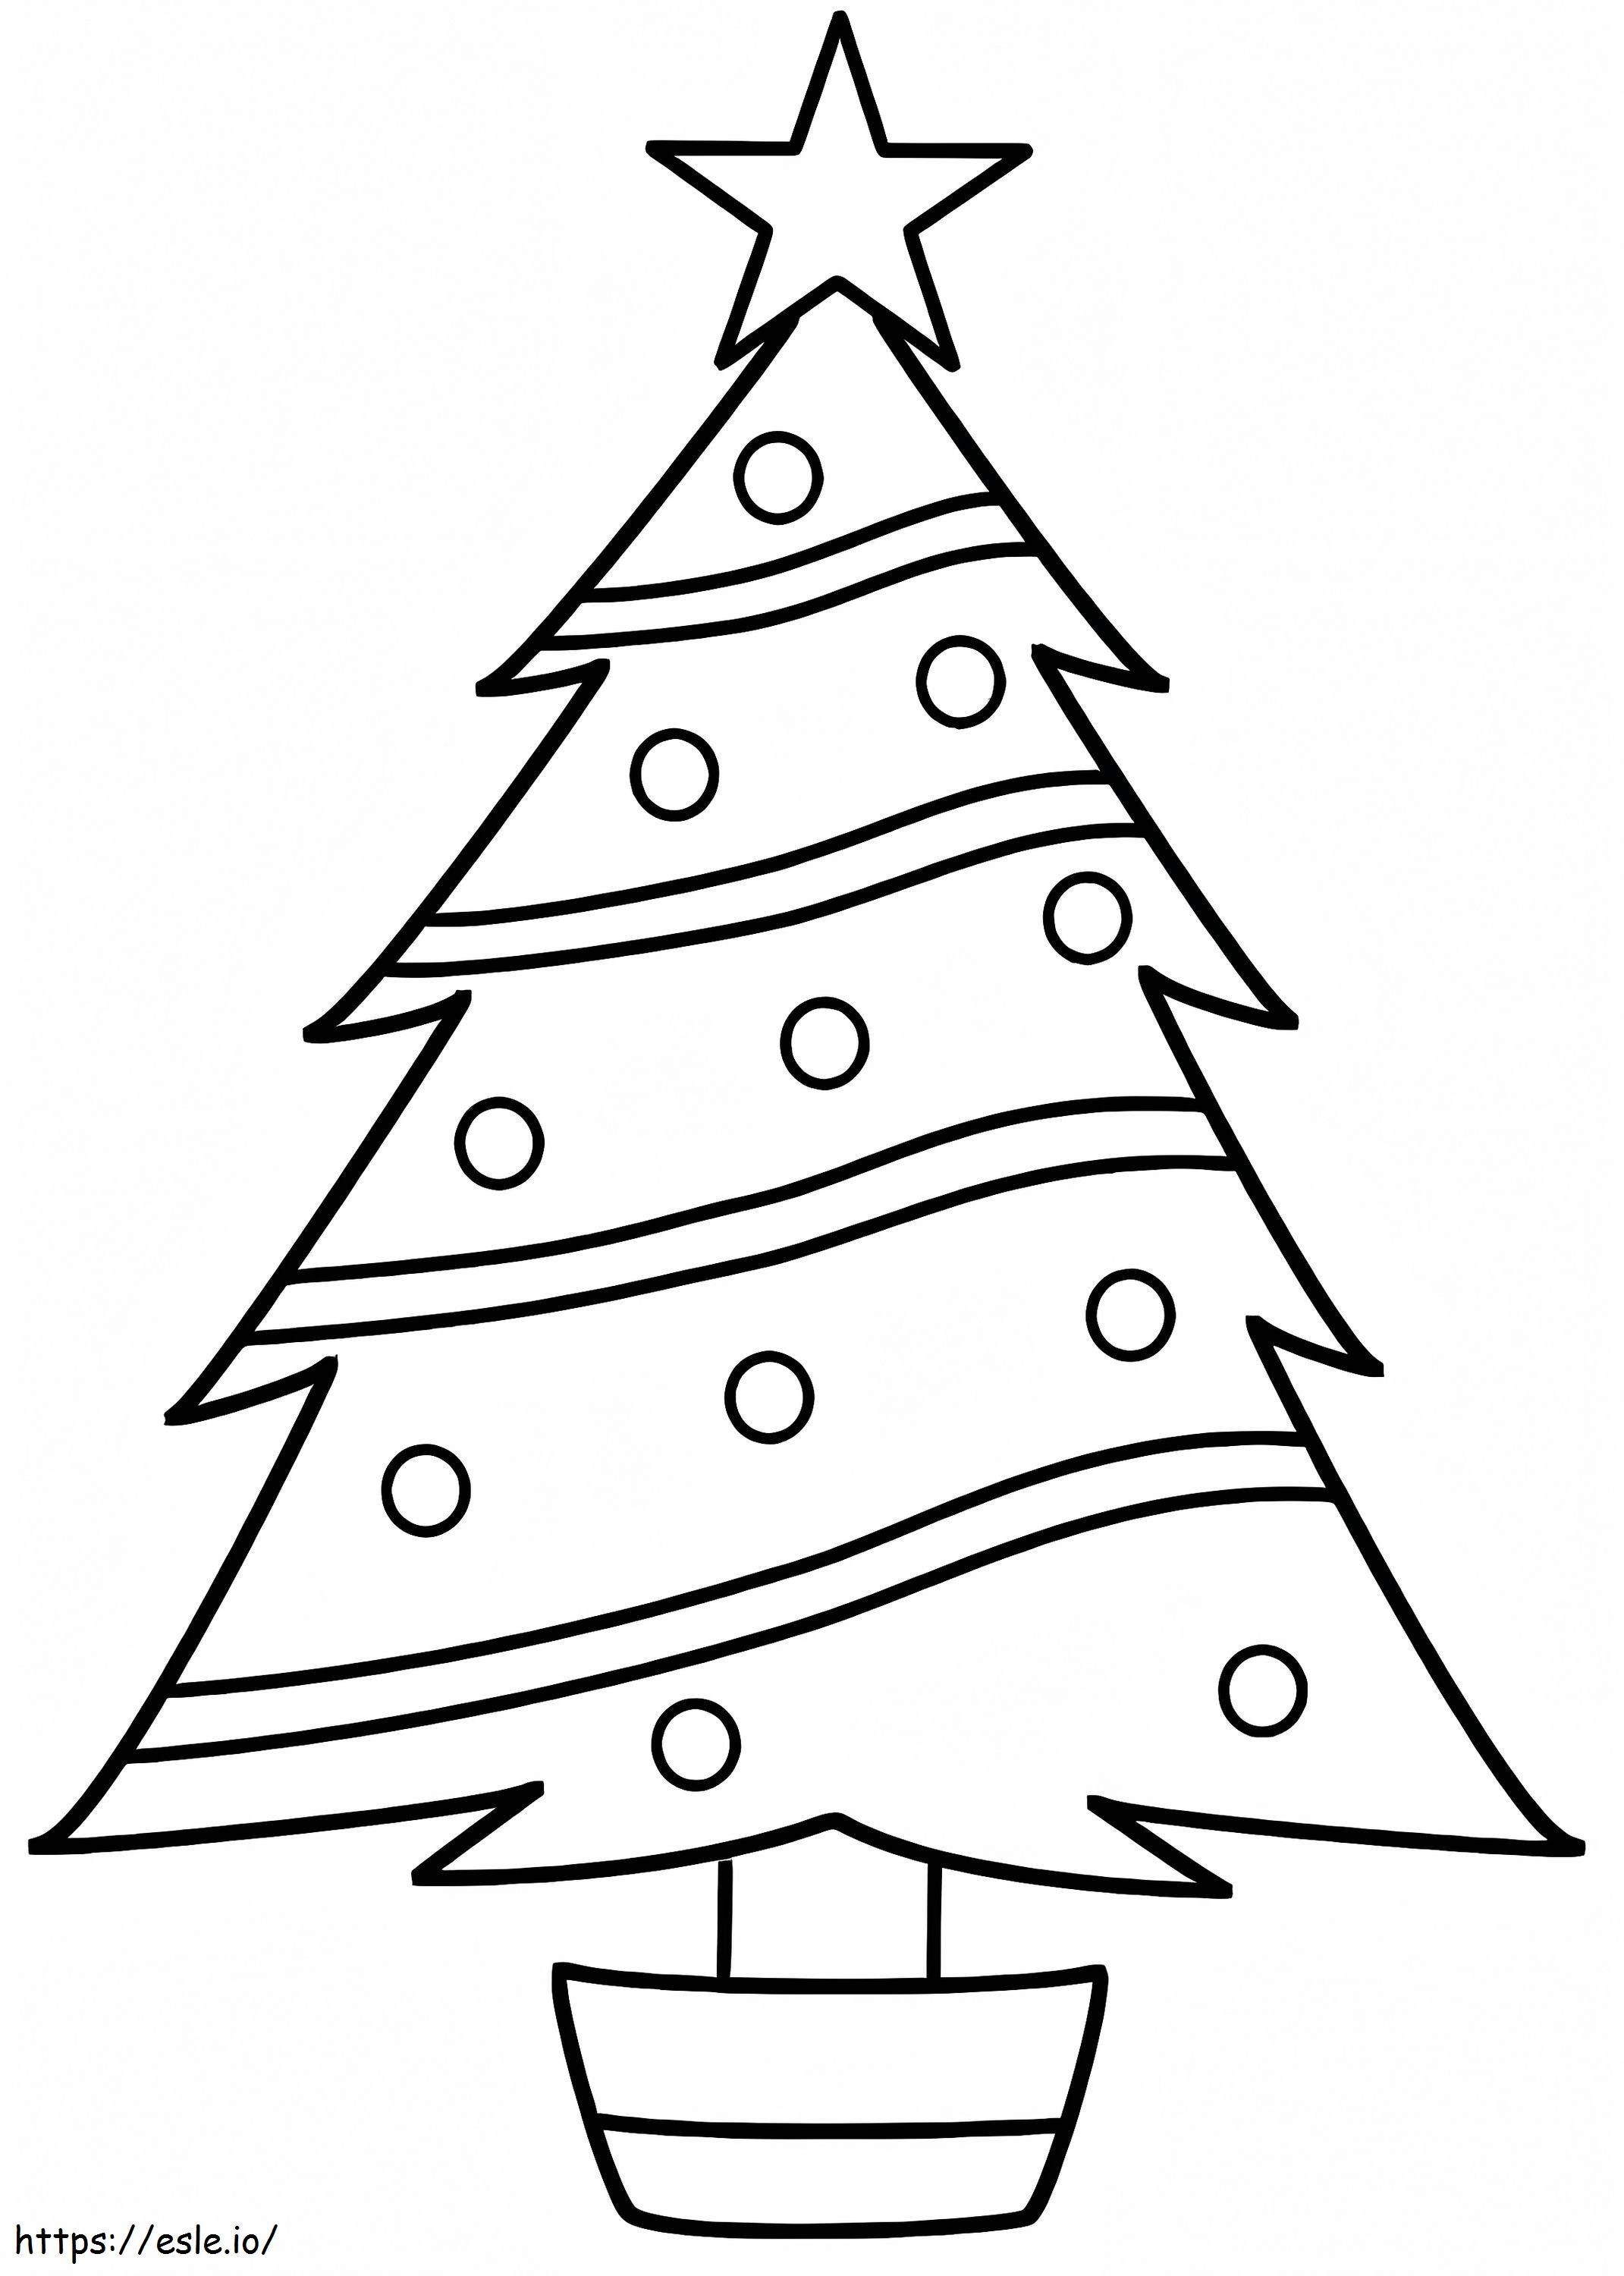 Simple Star On The Christmas Tree coloring page